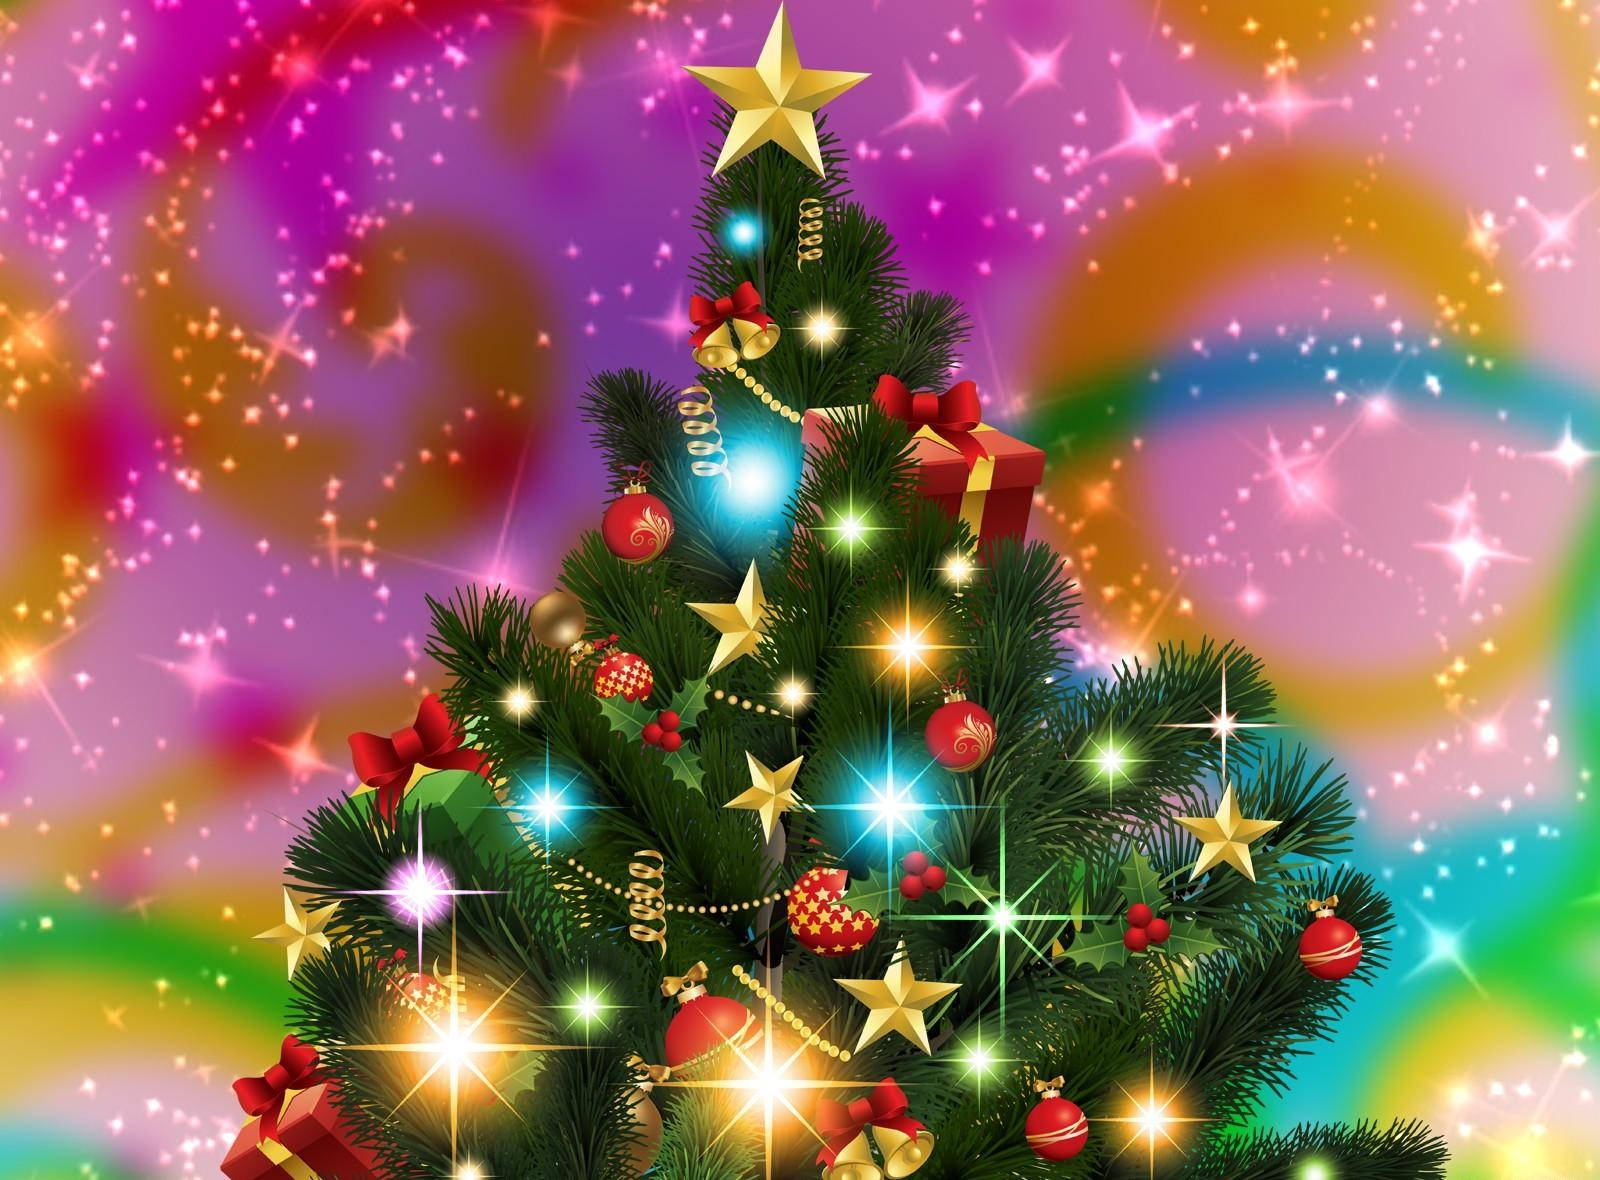 Bring Christmas to Life with a Colorful Holiday Tree Wallpaper